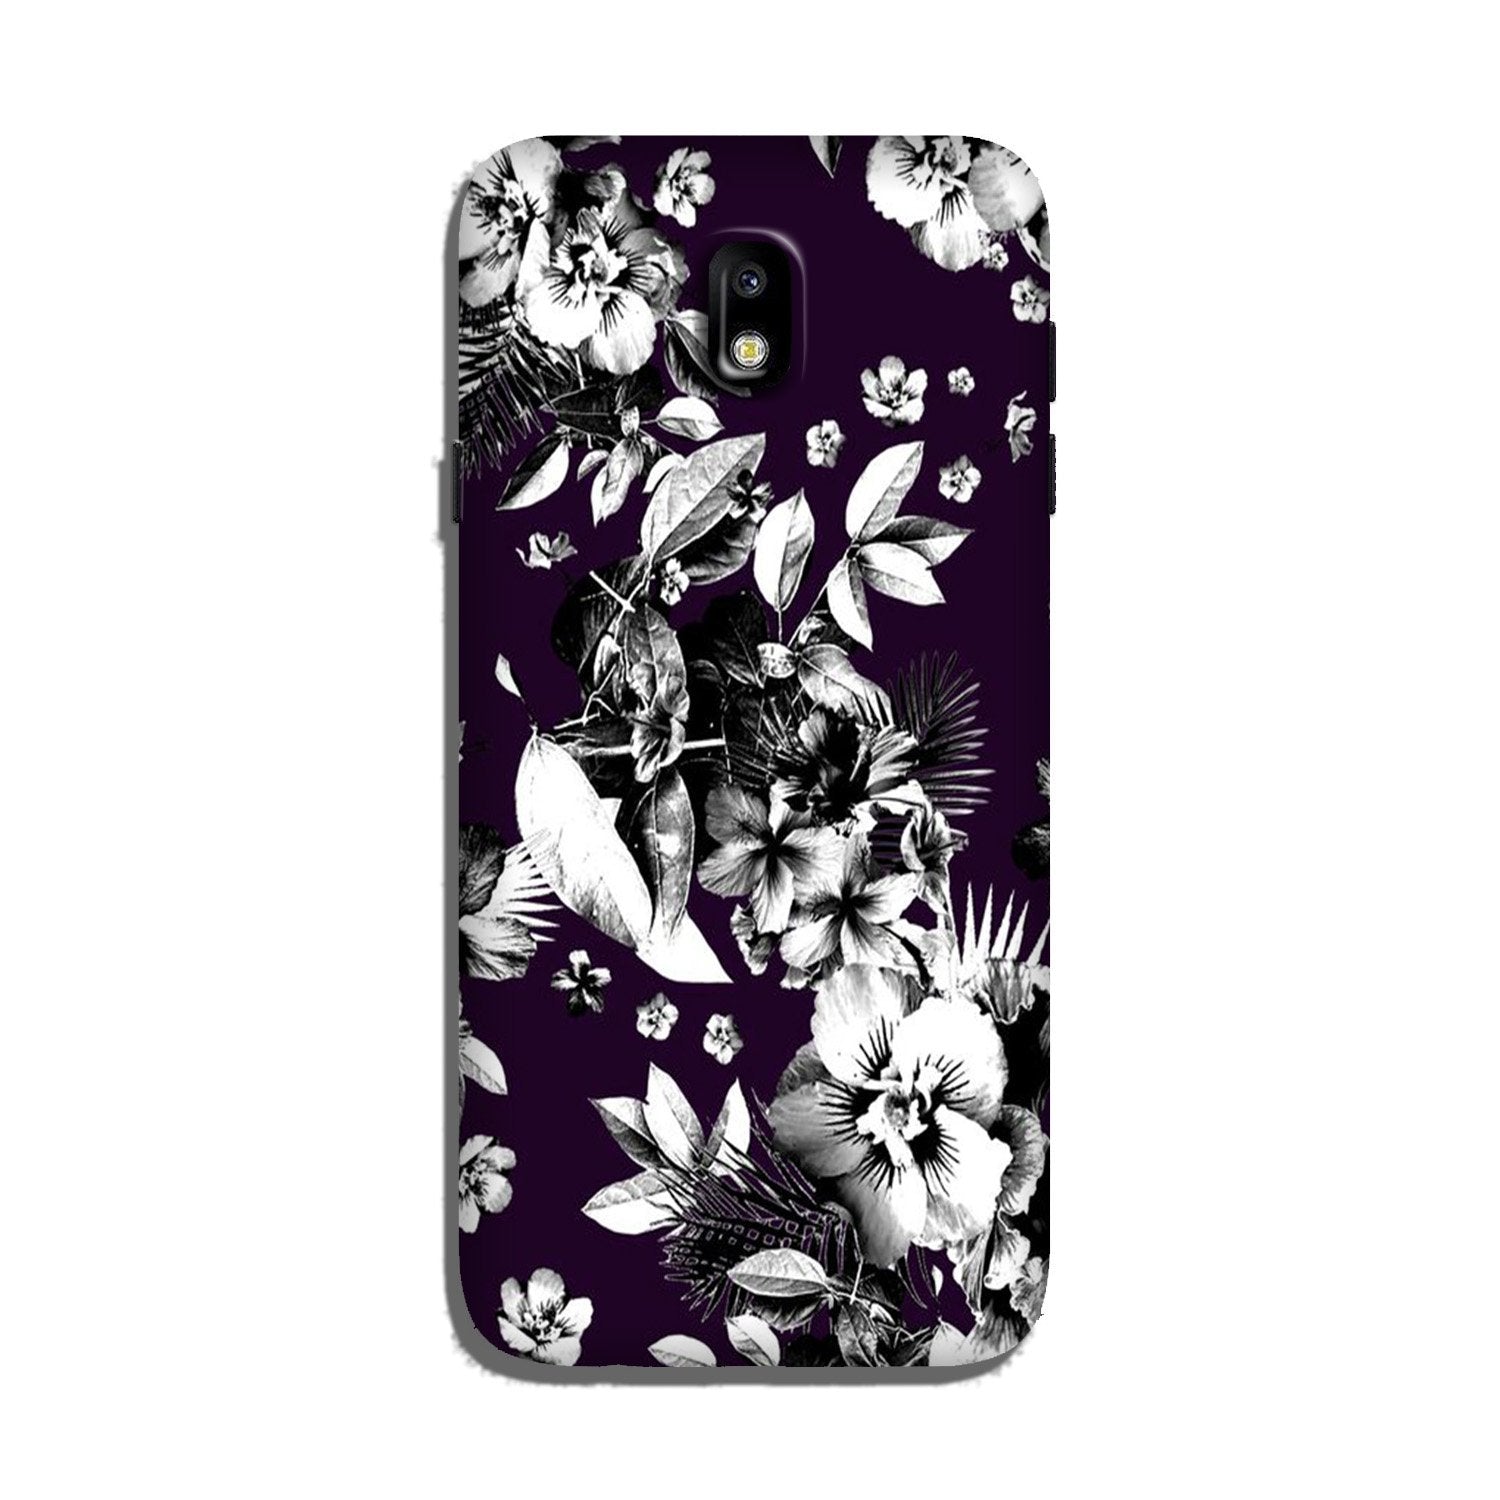 white flowers Case for Galaxy J7 Pro